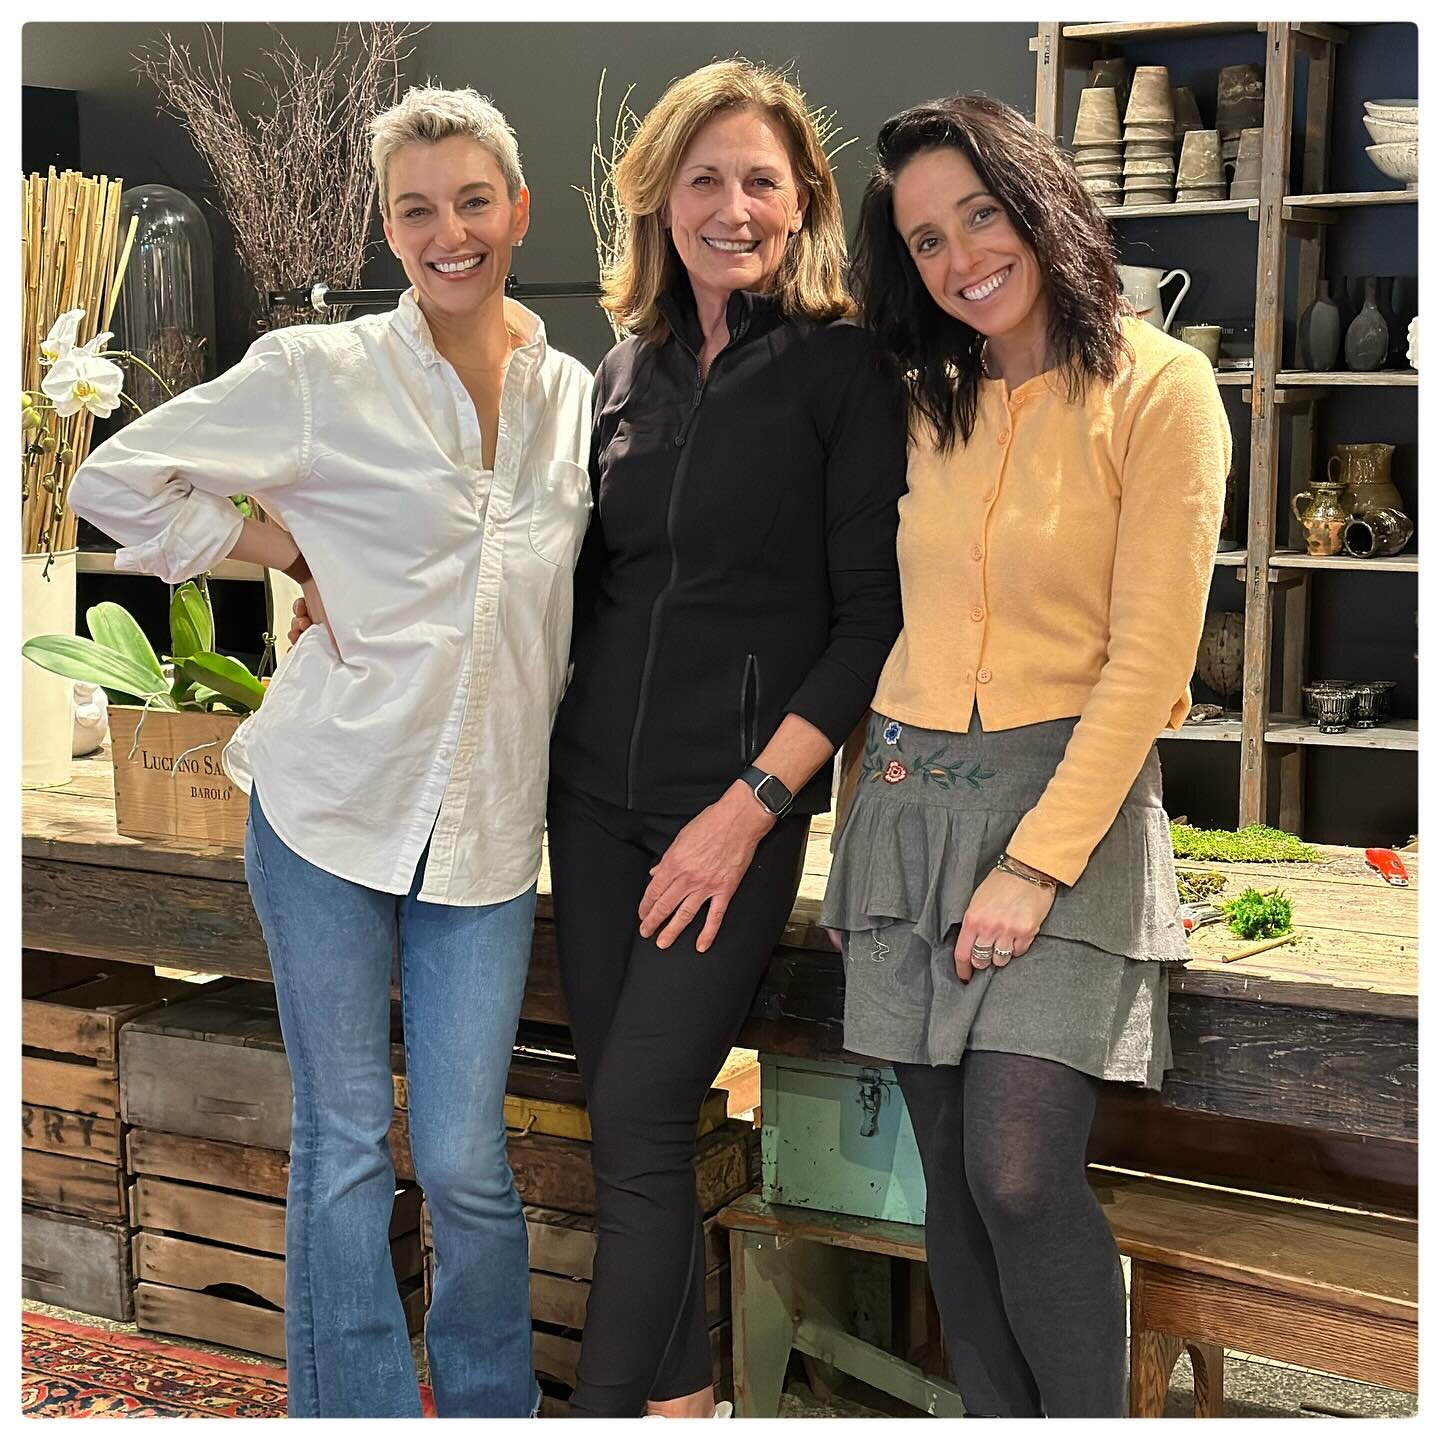 we spent this International Women&rsquo;s Day with our mentor, Kathy of Seasons 440 &hellip; an orchid styling goddess. we learned so much from Kathy as she taught us her tips and shared insights to her arranging style. so grateful for the support, a